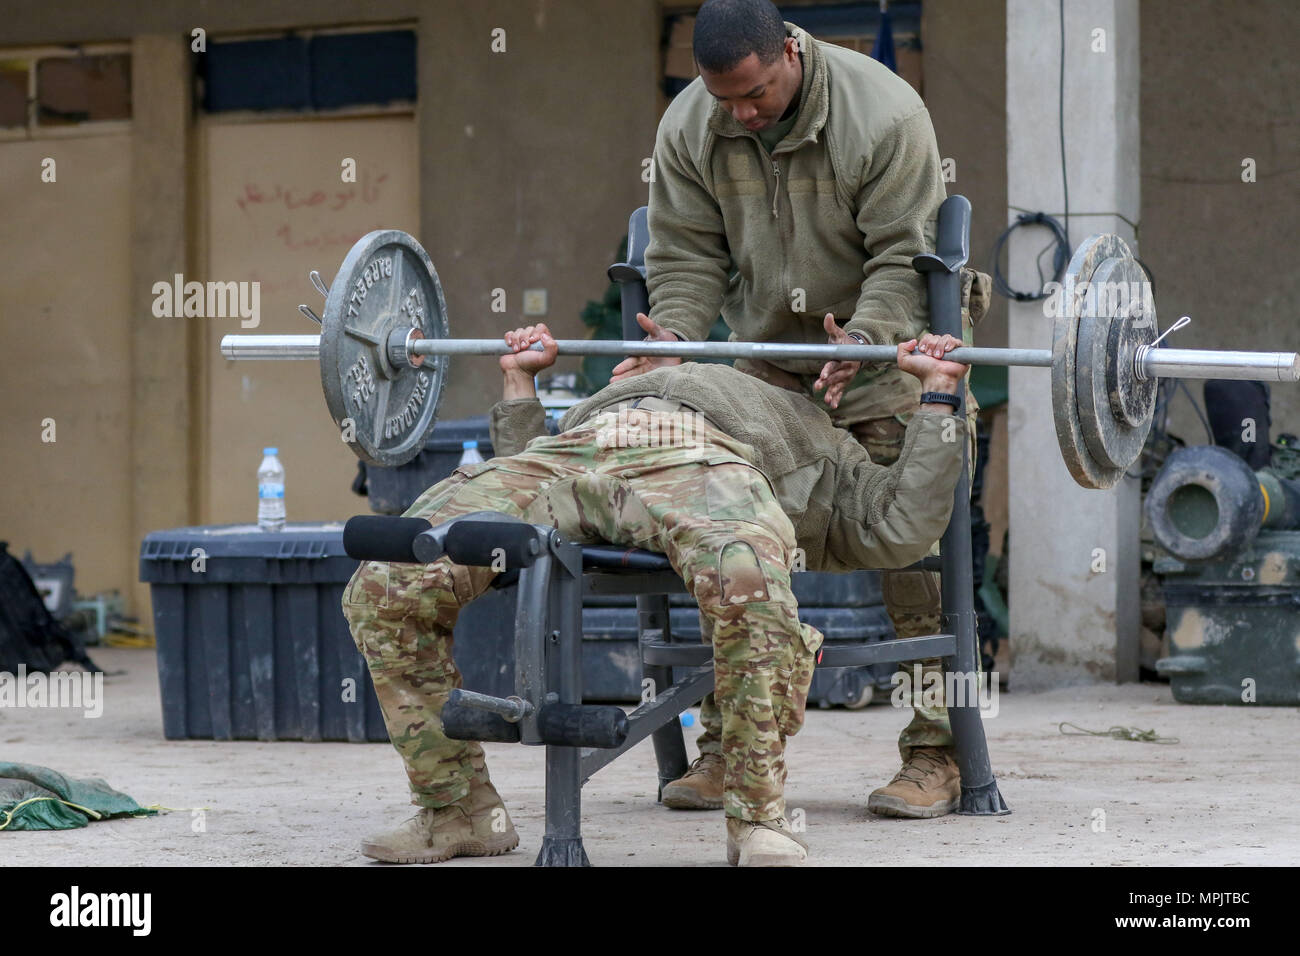 U.S. Army Sgt. Cameron Ragsdale, deployed in support of Combined Joint Task Force - Operation Inherent Resolve and assigned to 2nd Brigade Combat Team, 82nd Airborne Division, spots a partner while weightlifting during a break in operations at a tactical assembly area near Al Tarab, Iraq, March 17, 2017. The 2nd BCT, 82nd Abn, Div., enables their Iraqi security forces partners through the advise and assist mission, contributing planning, intelligence collection and analysis, force protection, and precision fires to achieve the military annihilation of ISIS. CJTF-OIR is the global Coalition to  Stock Photo